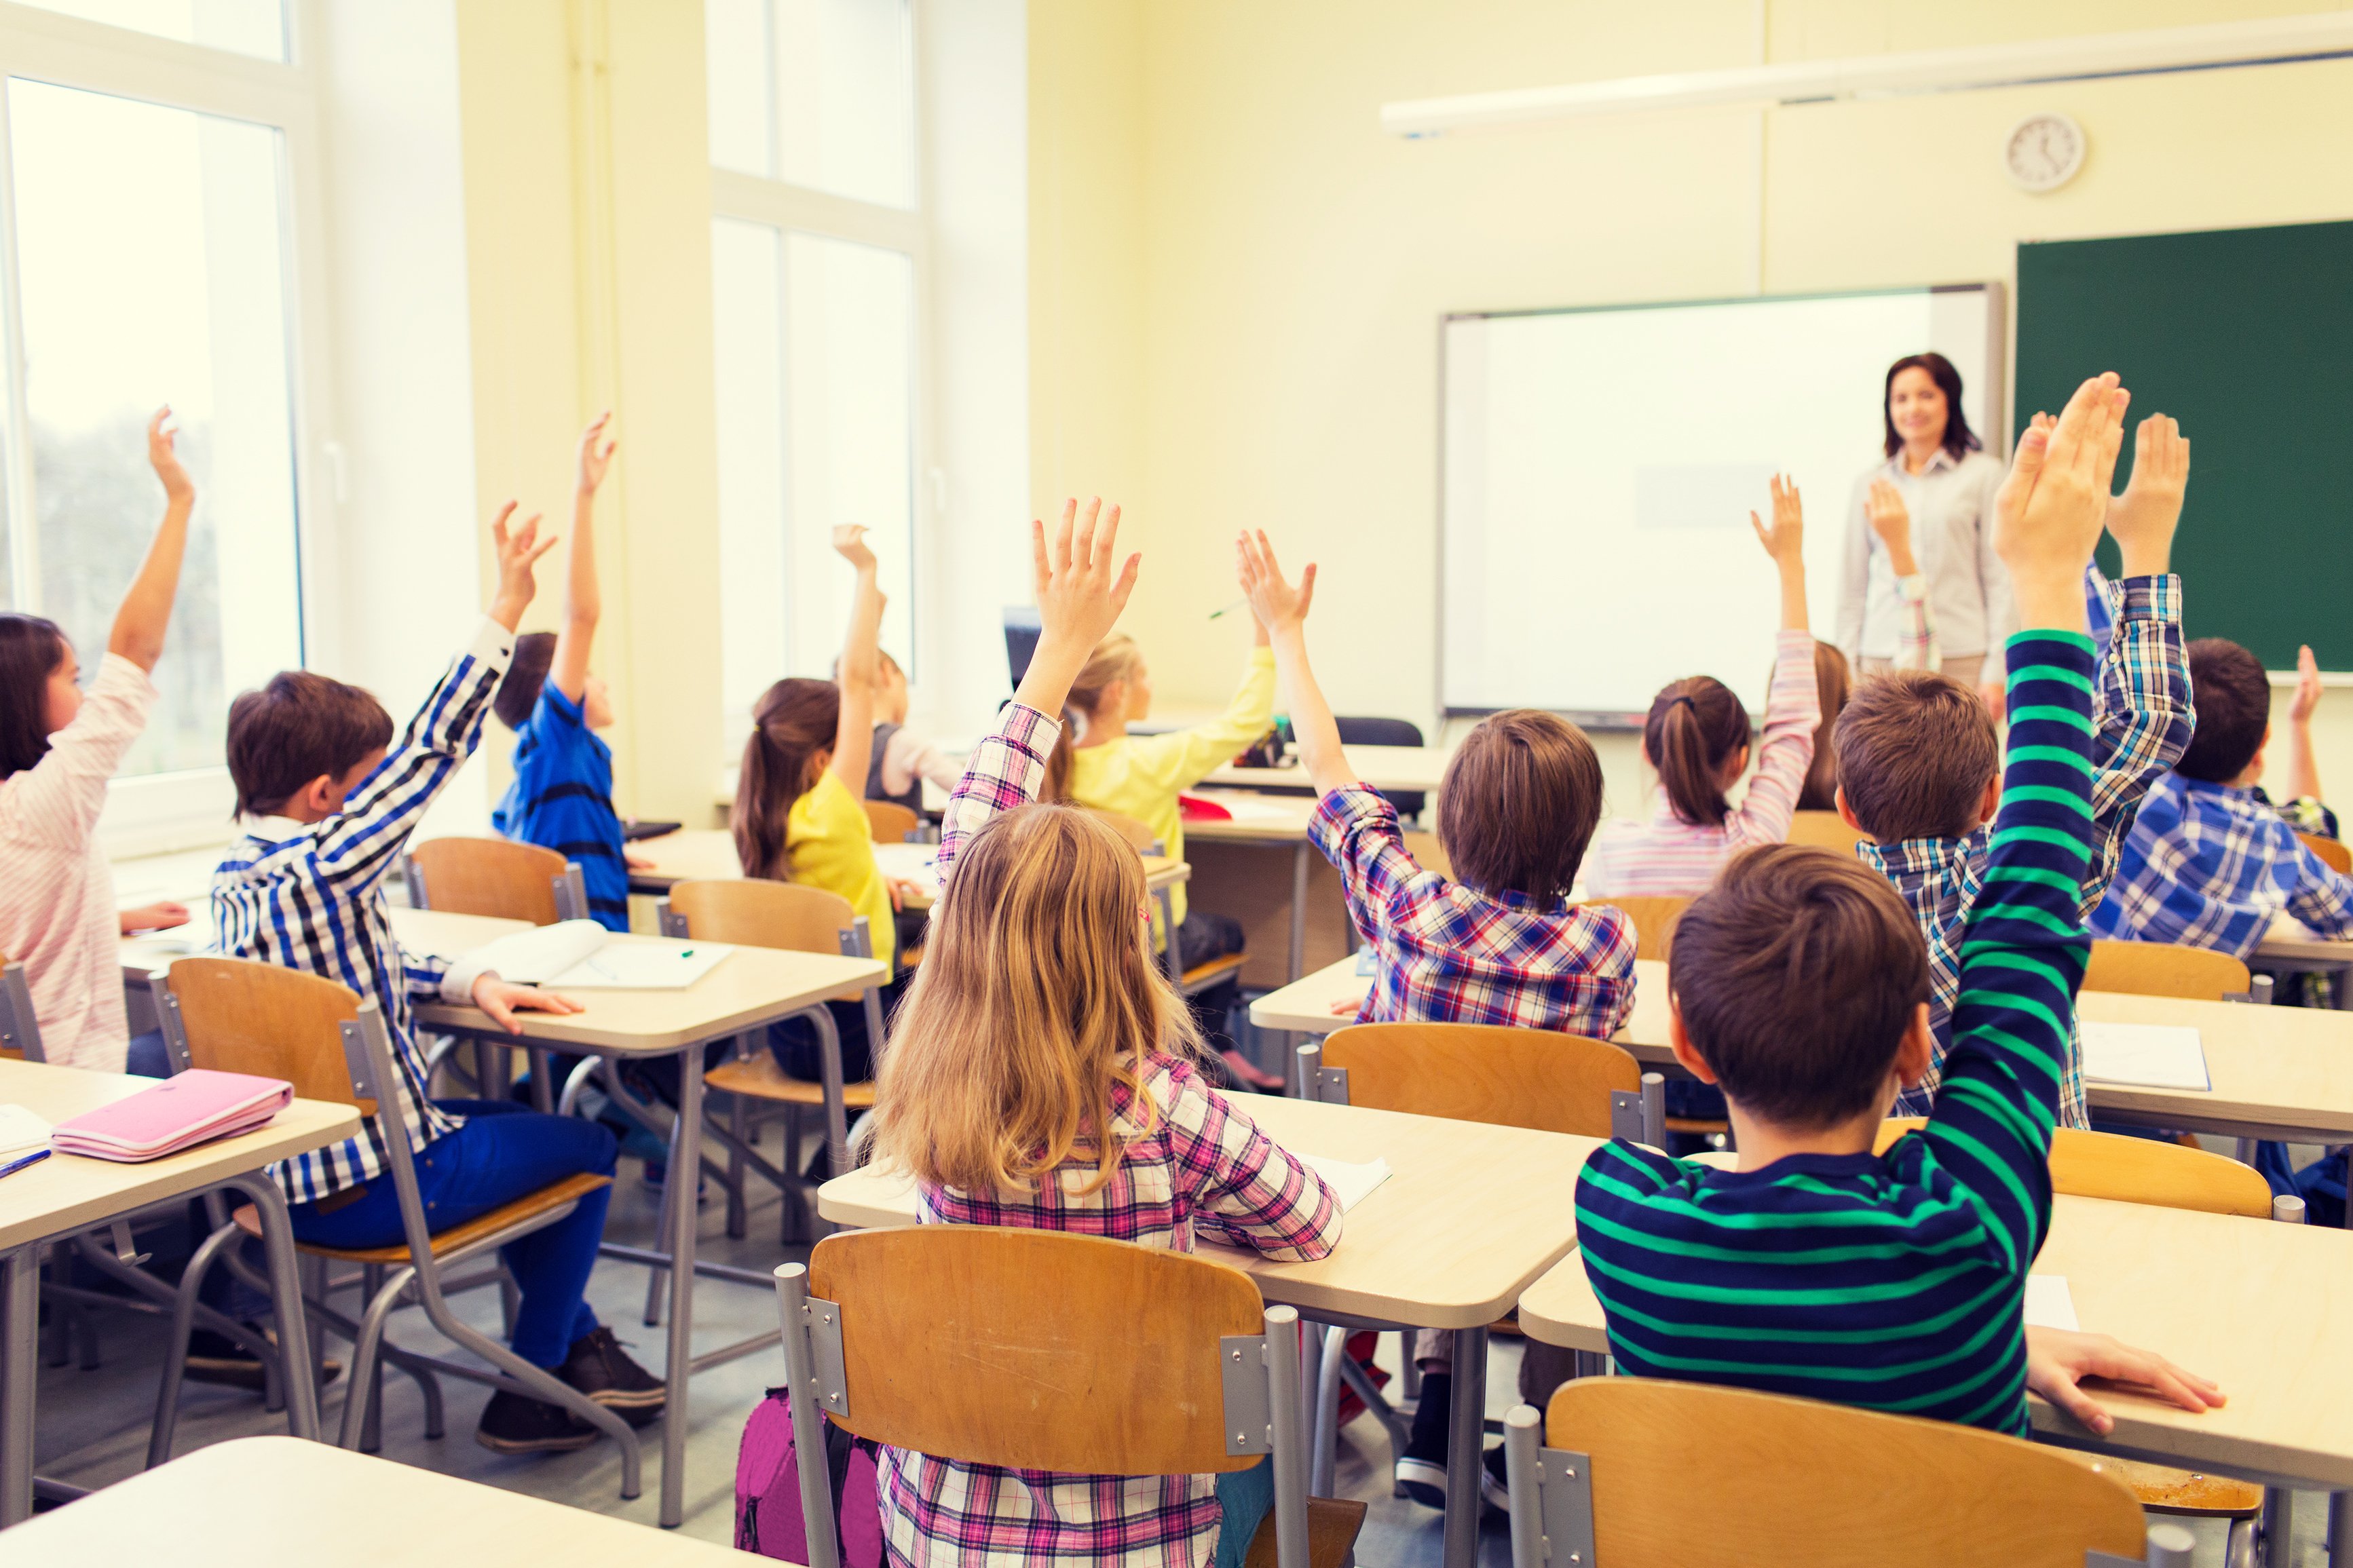 Group of school kids with teacher sitting in classroom and raising hands | Photo: Shutterstock